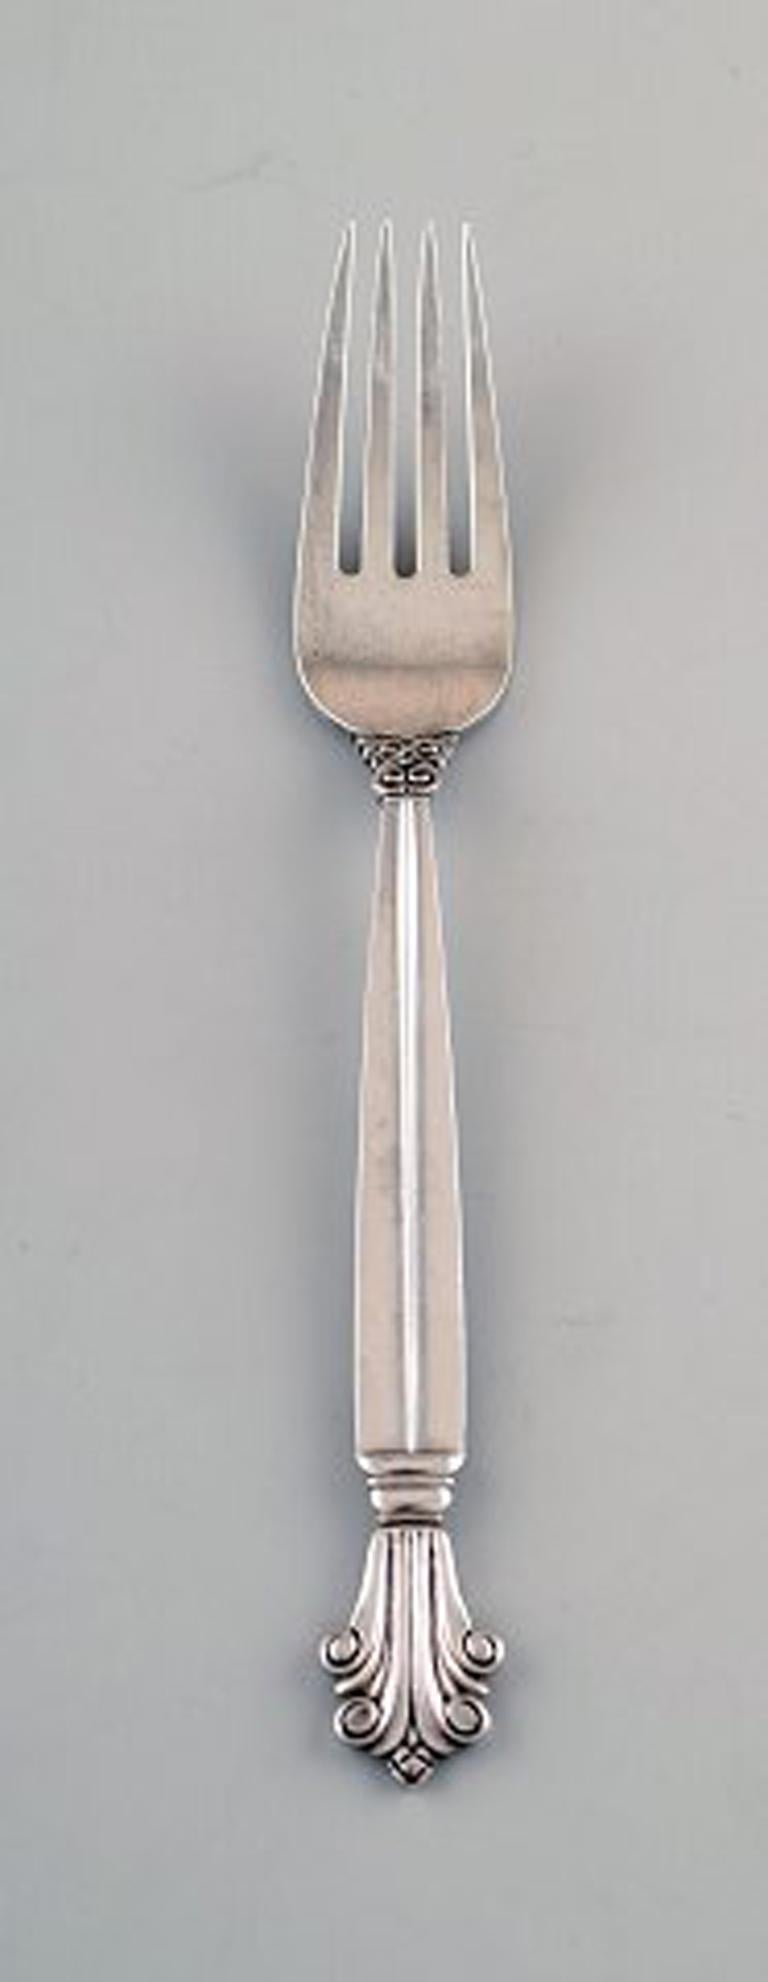 Georg Jensen sterling silver acanthus lunch fork.
Ten pieces in stock.
Measures: 18 cm.
Early stamp.
In very good condition.